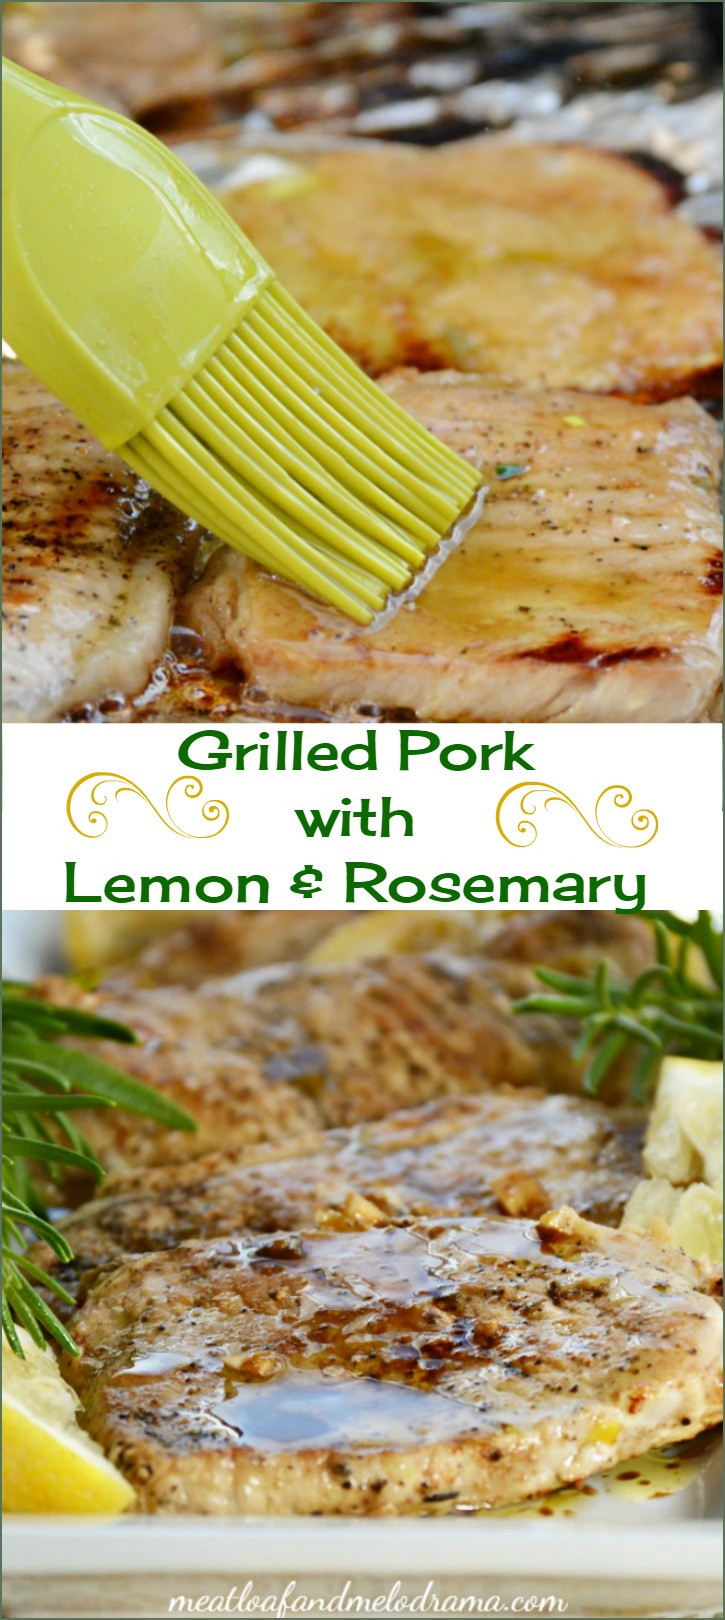 Pork Loin Grilled
 grilled pork loin chops with lemon and rosemary